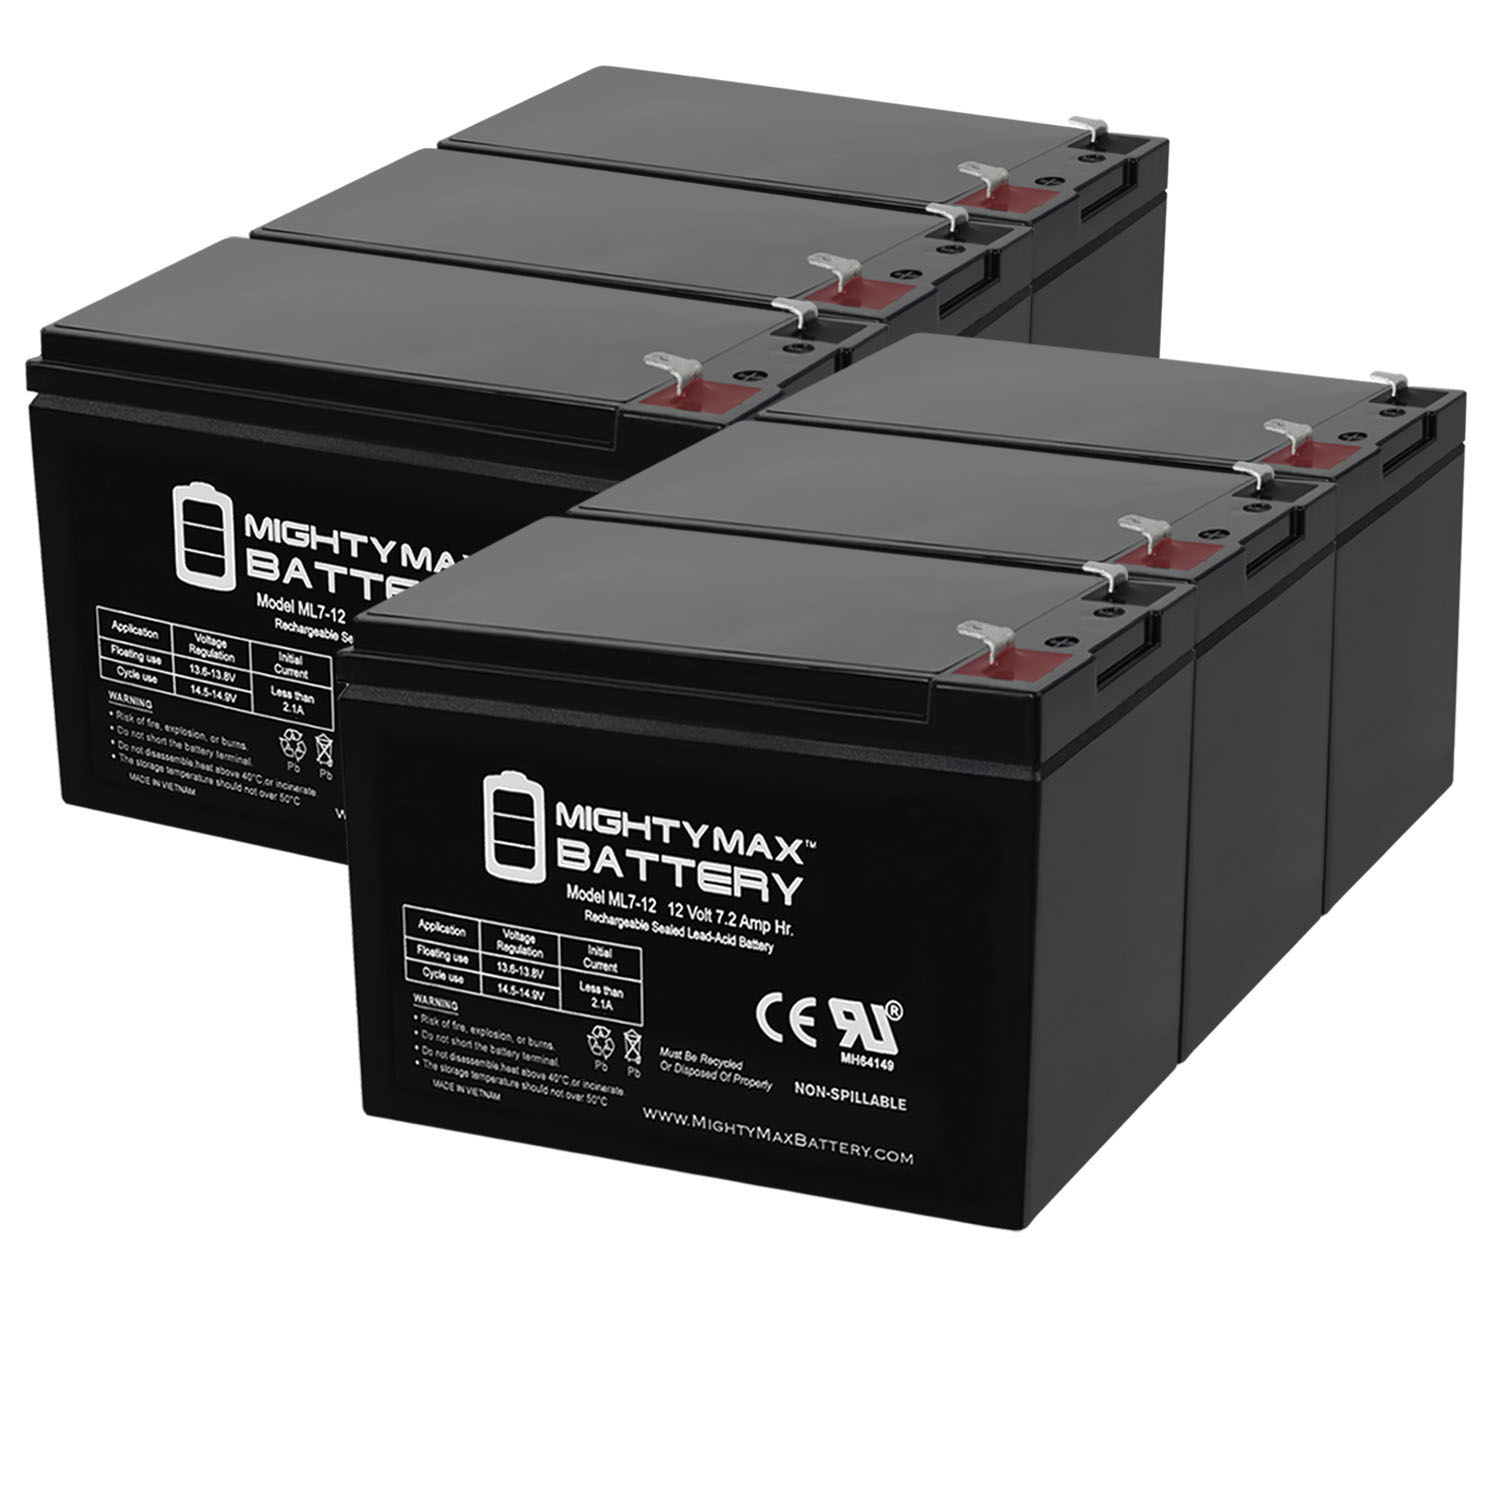 ML7-12 - 12V 7.2AH GS Portalac PX12072 Replacement Battery - 6 Pack